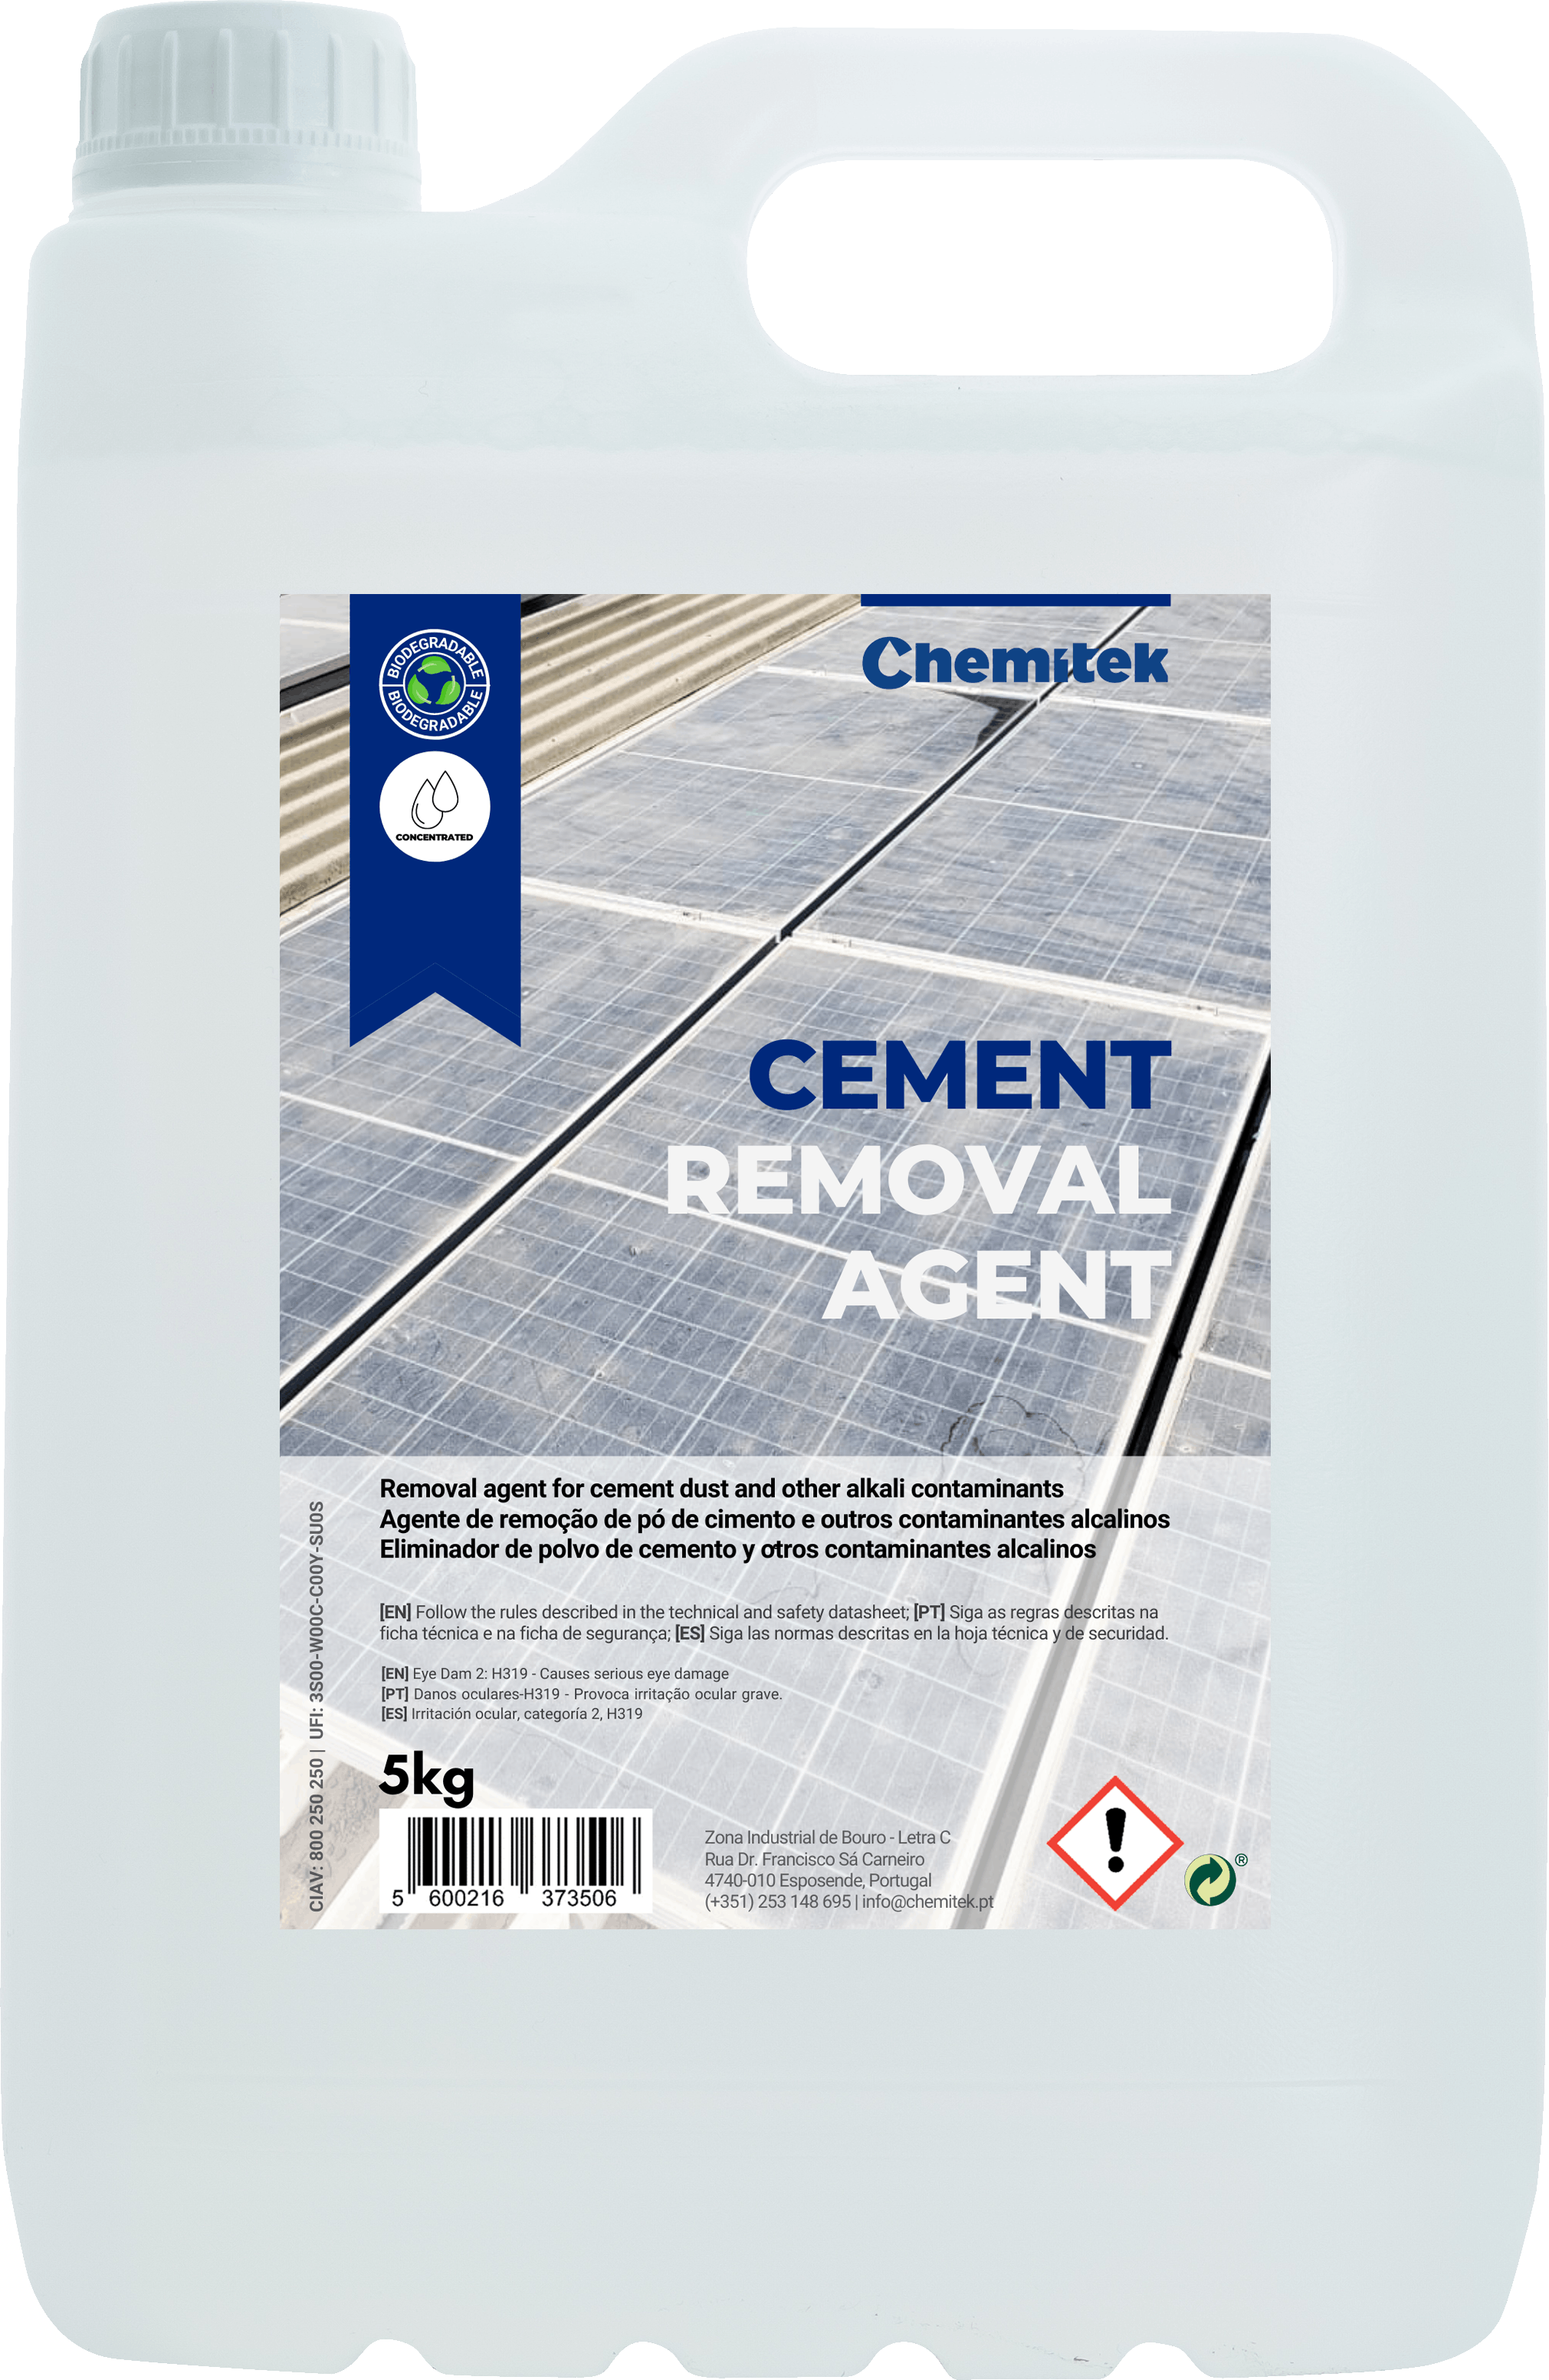 image - Cement Removal Agent - Removes Cement Dust cured on Solar Glass in Seconds